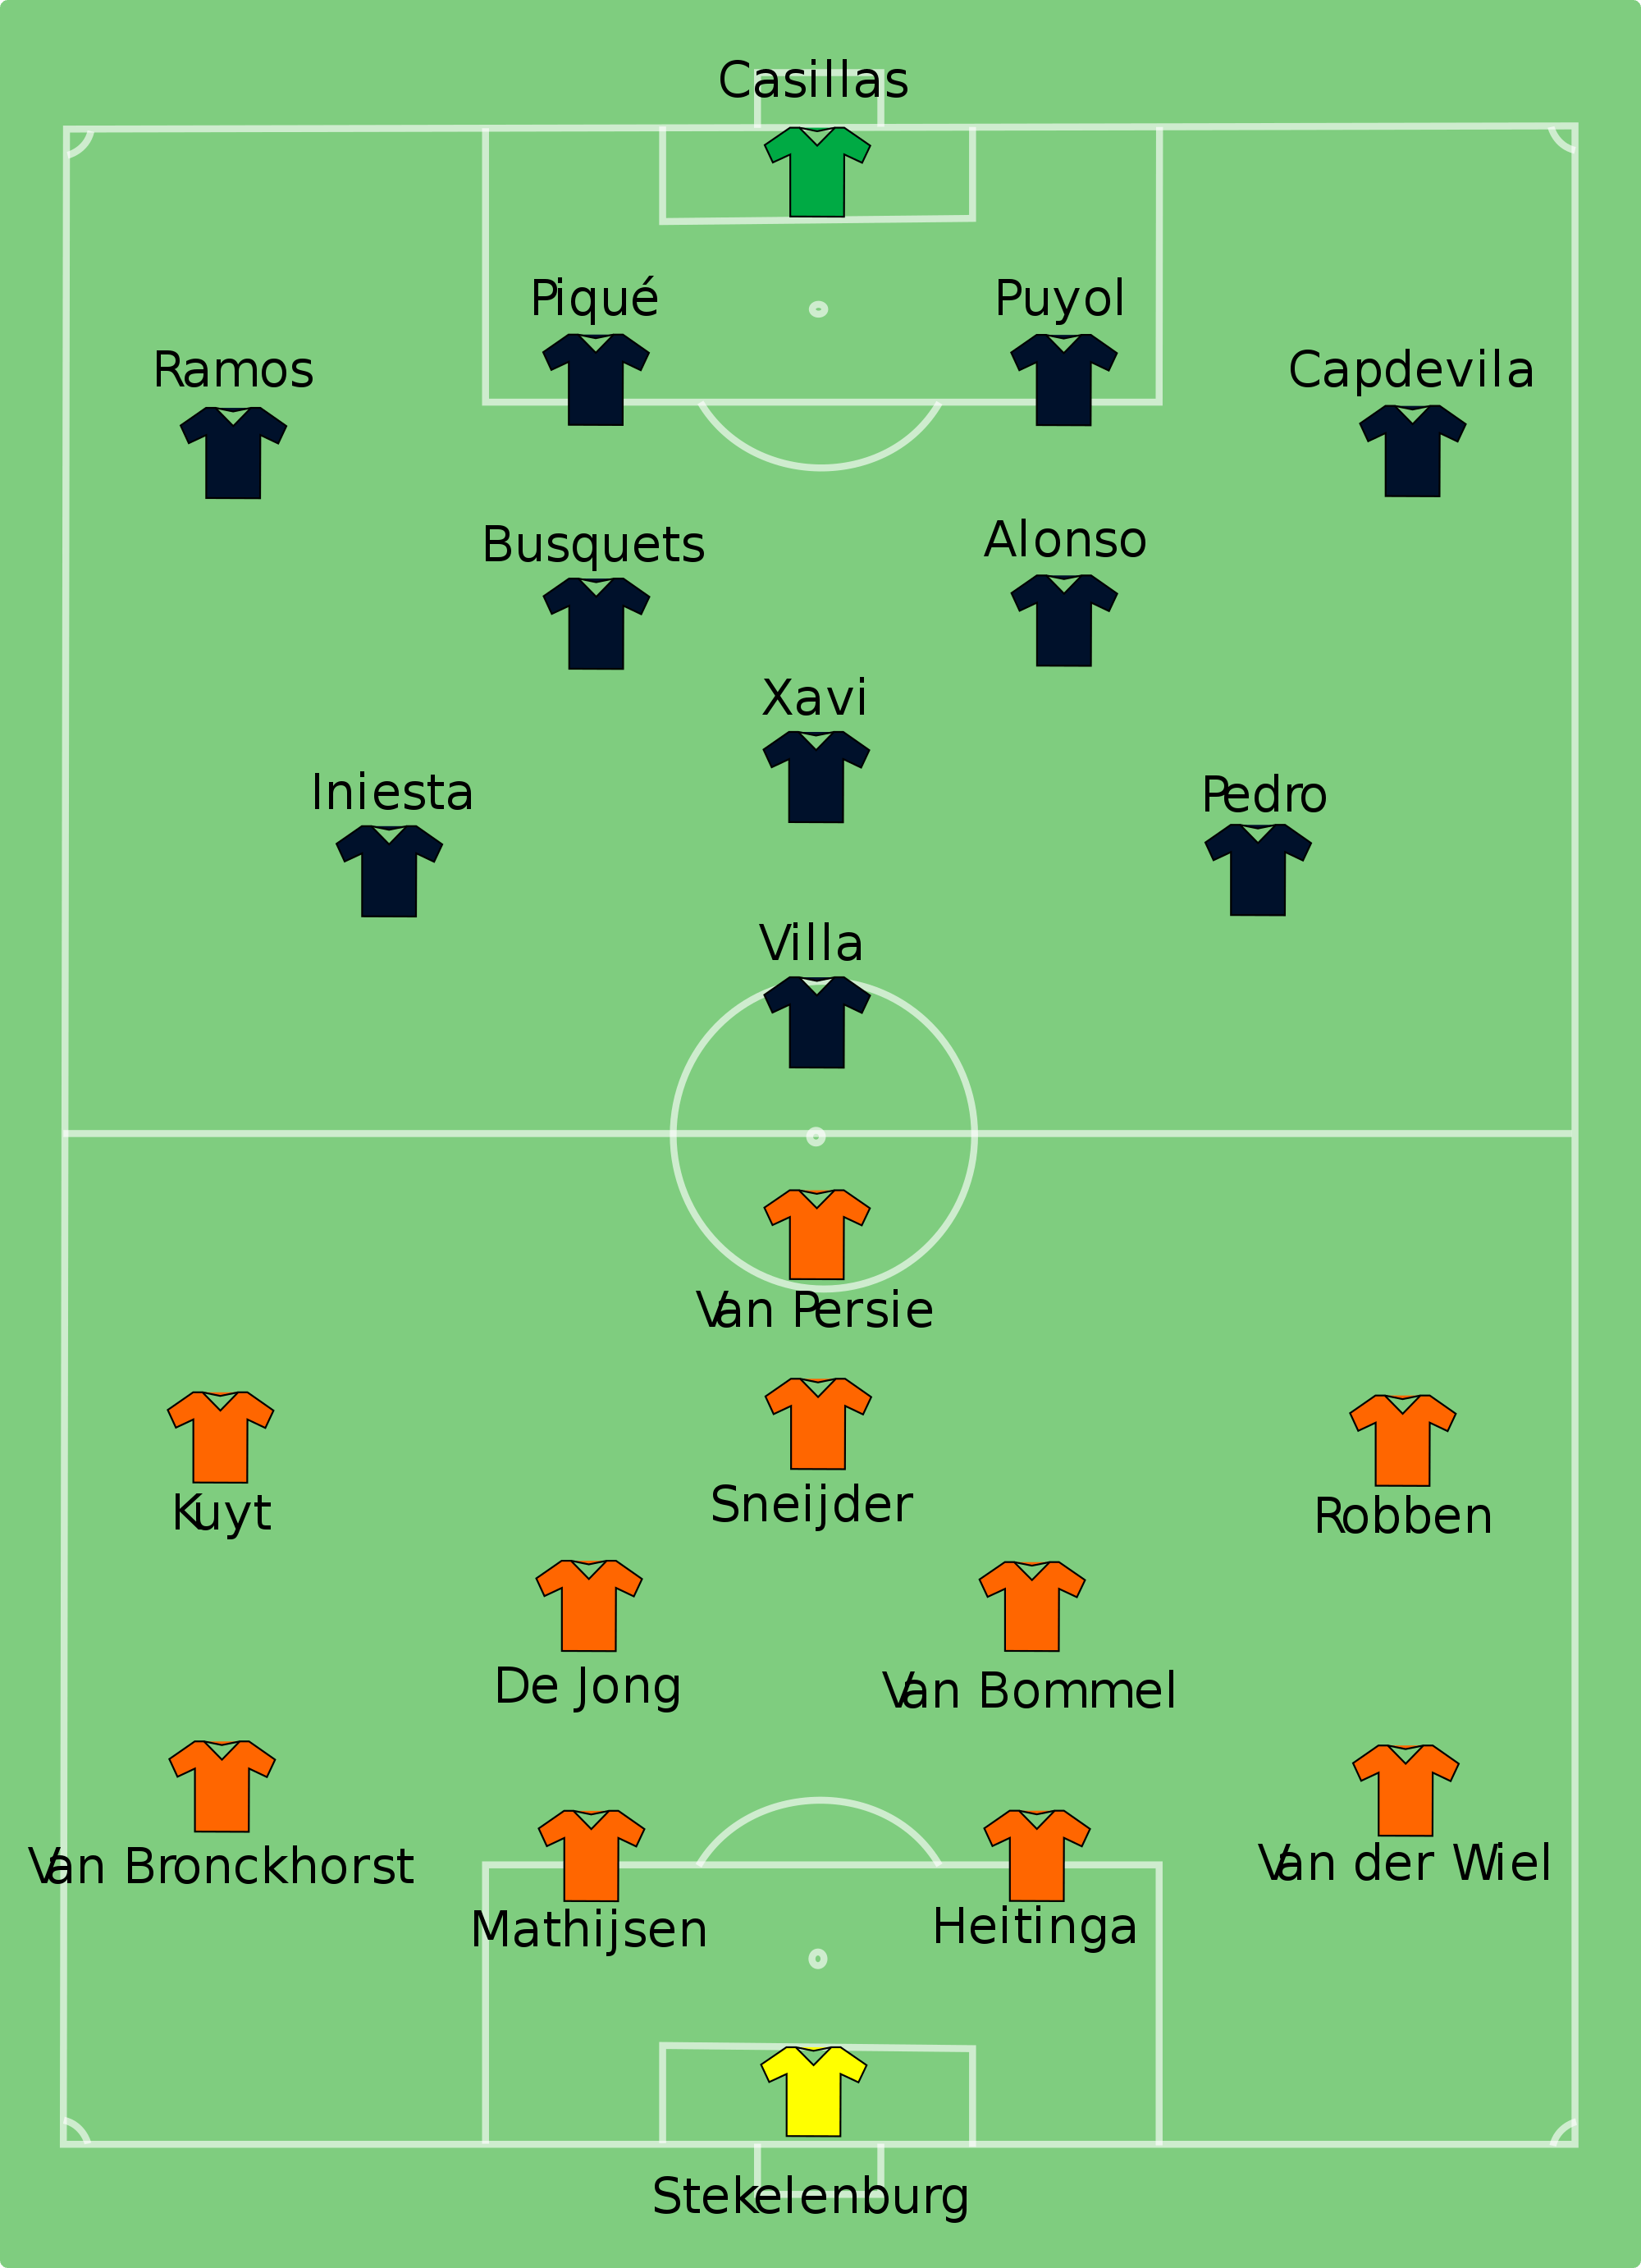 Spain 2010 World Cup - The best national team of all time? — The